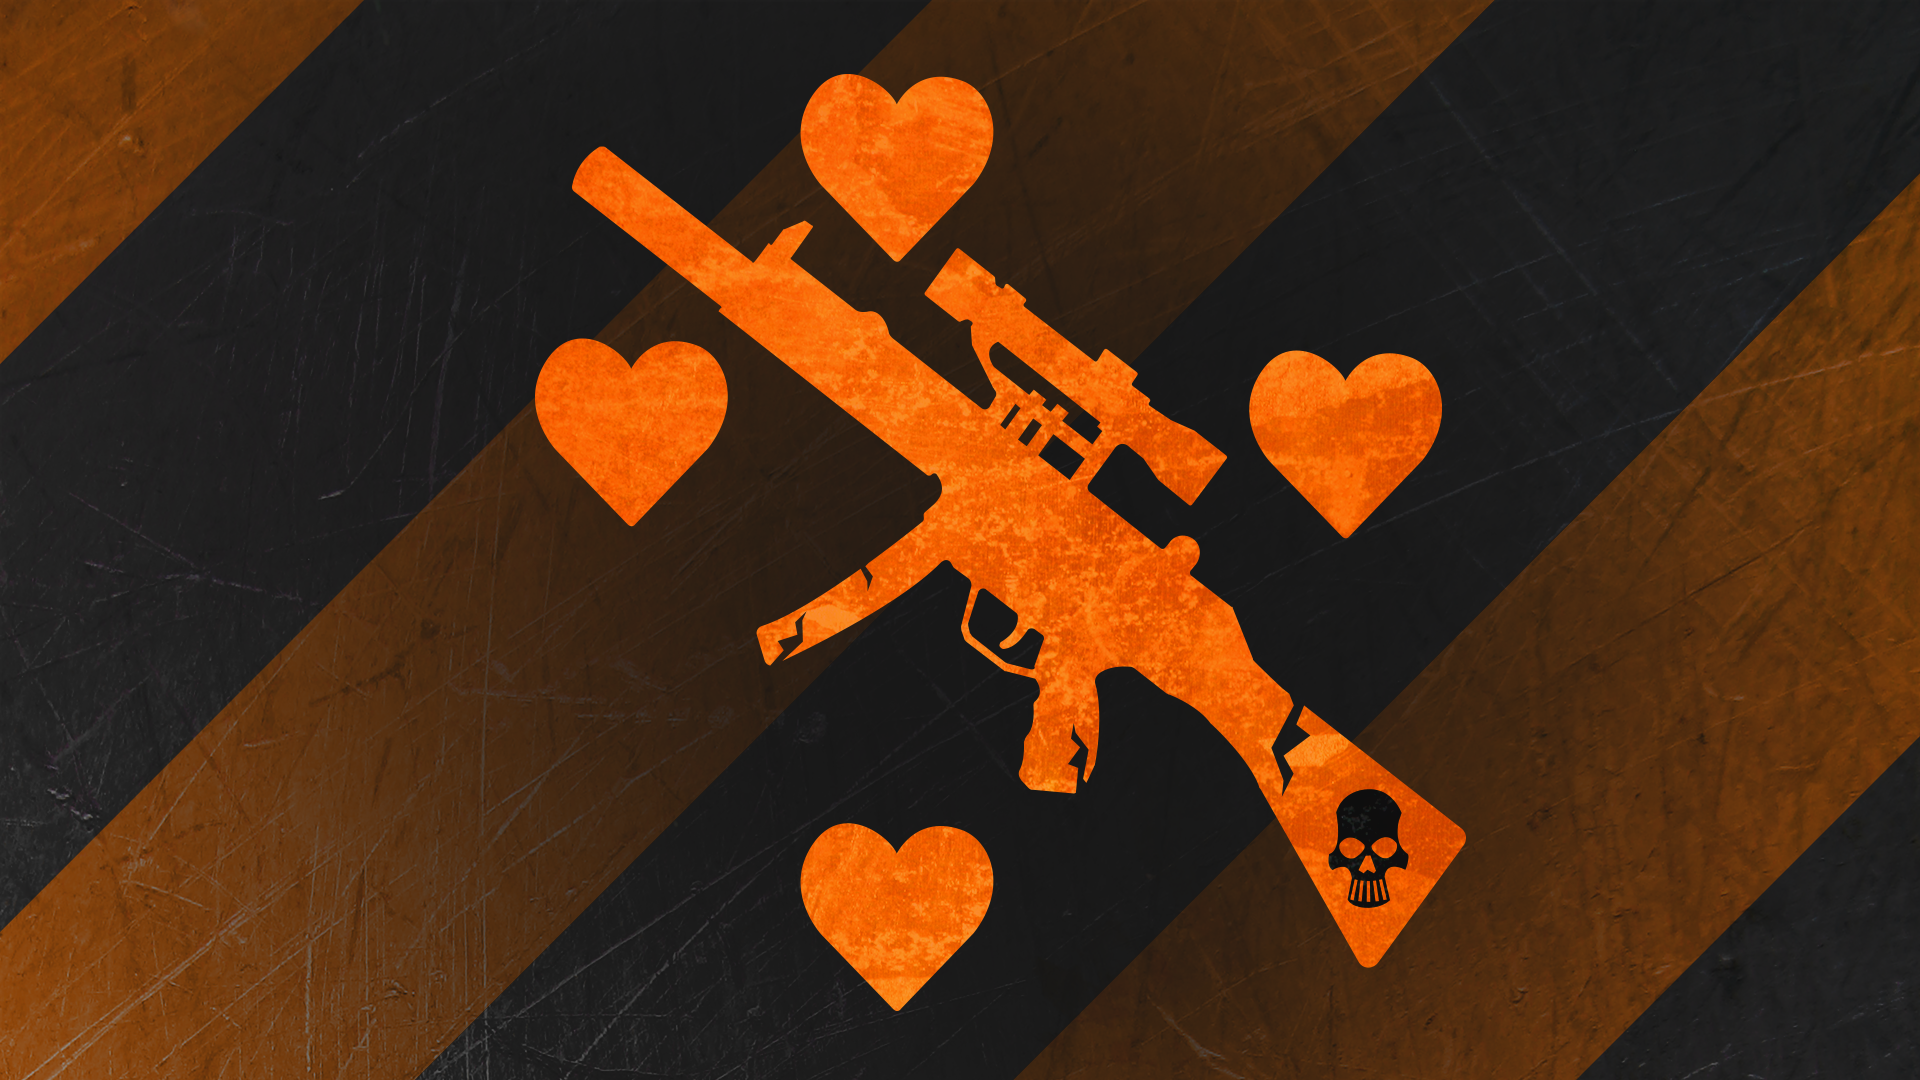 Icon for Weapons lover